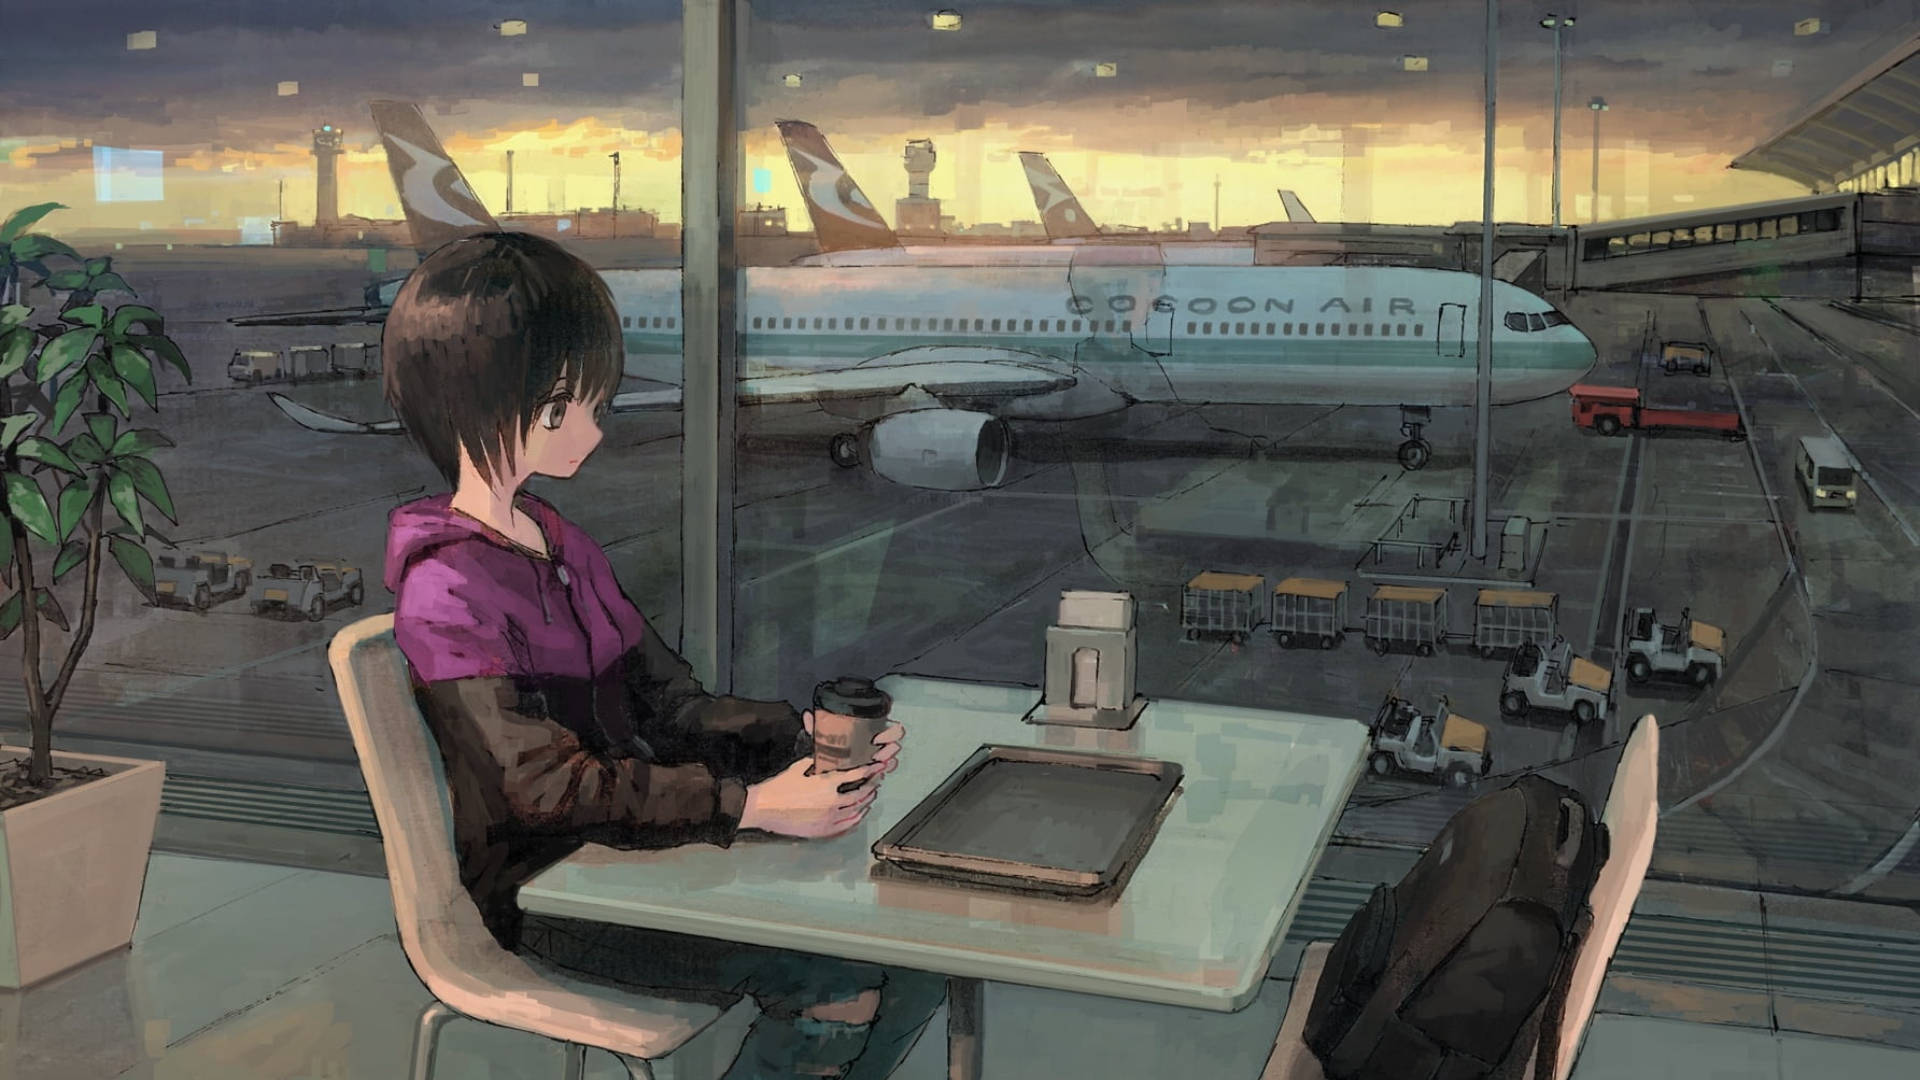 Tomboy Anime Girl At The Airport Wallpaper